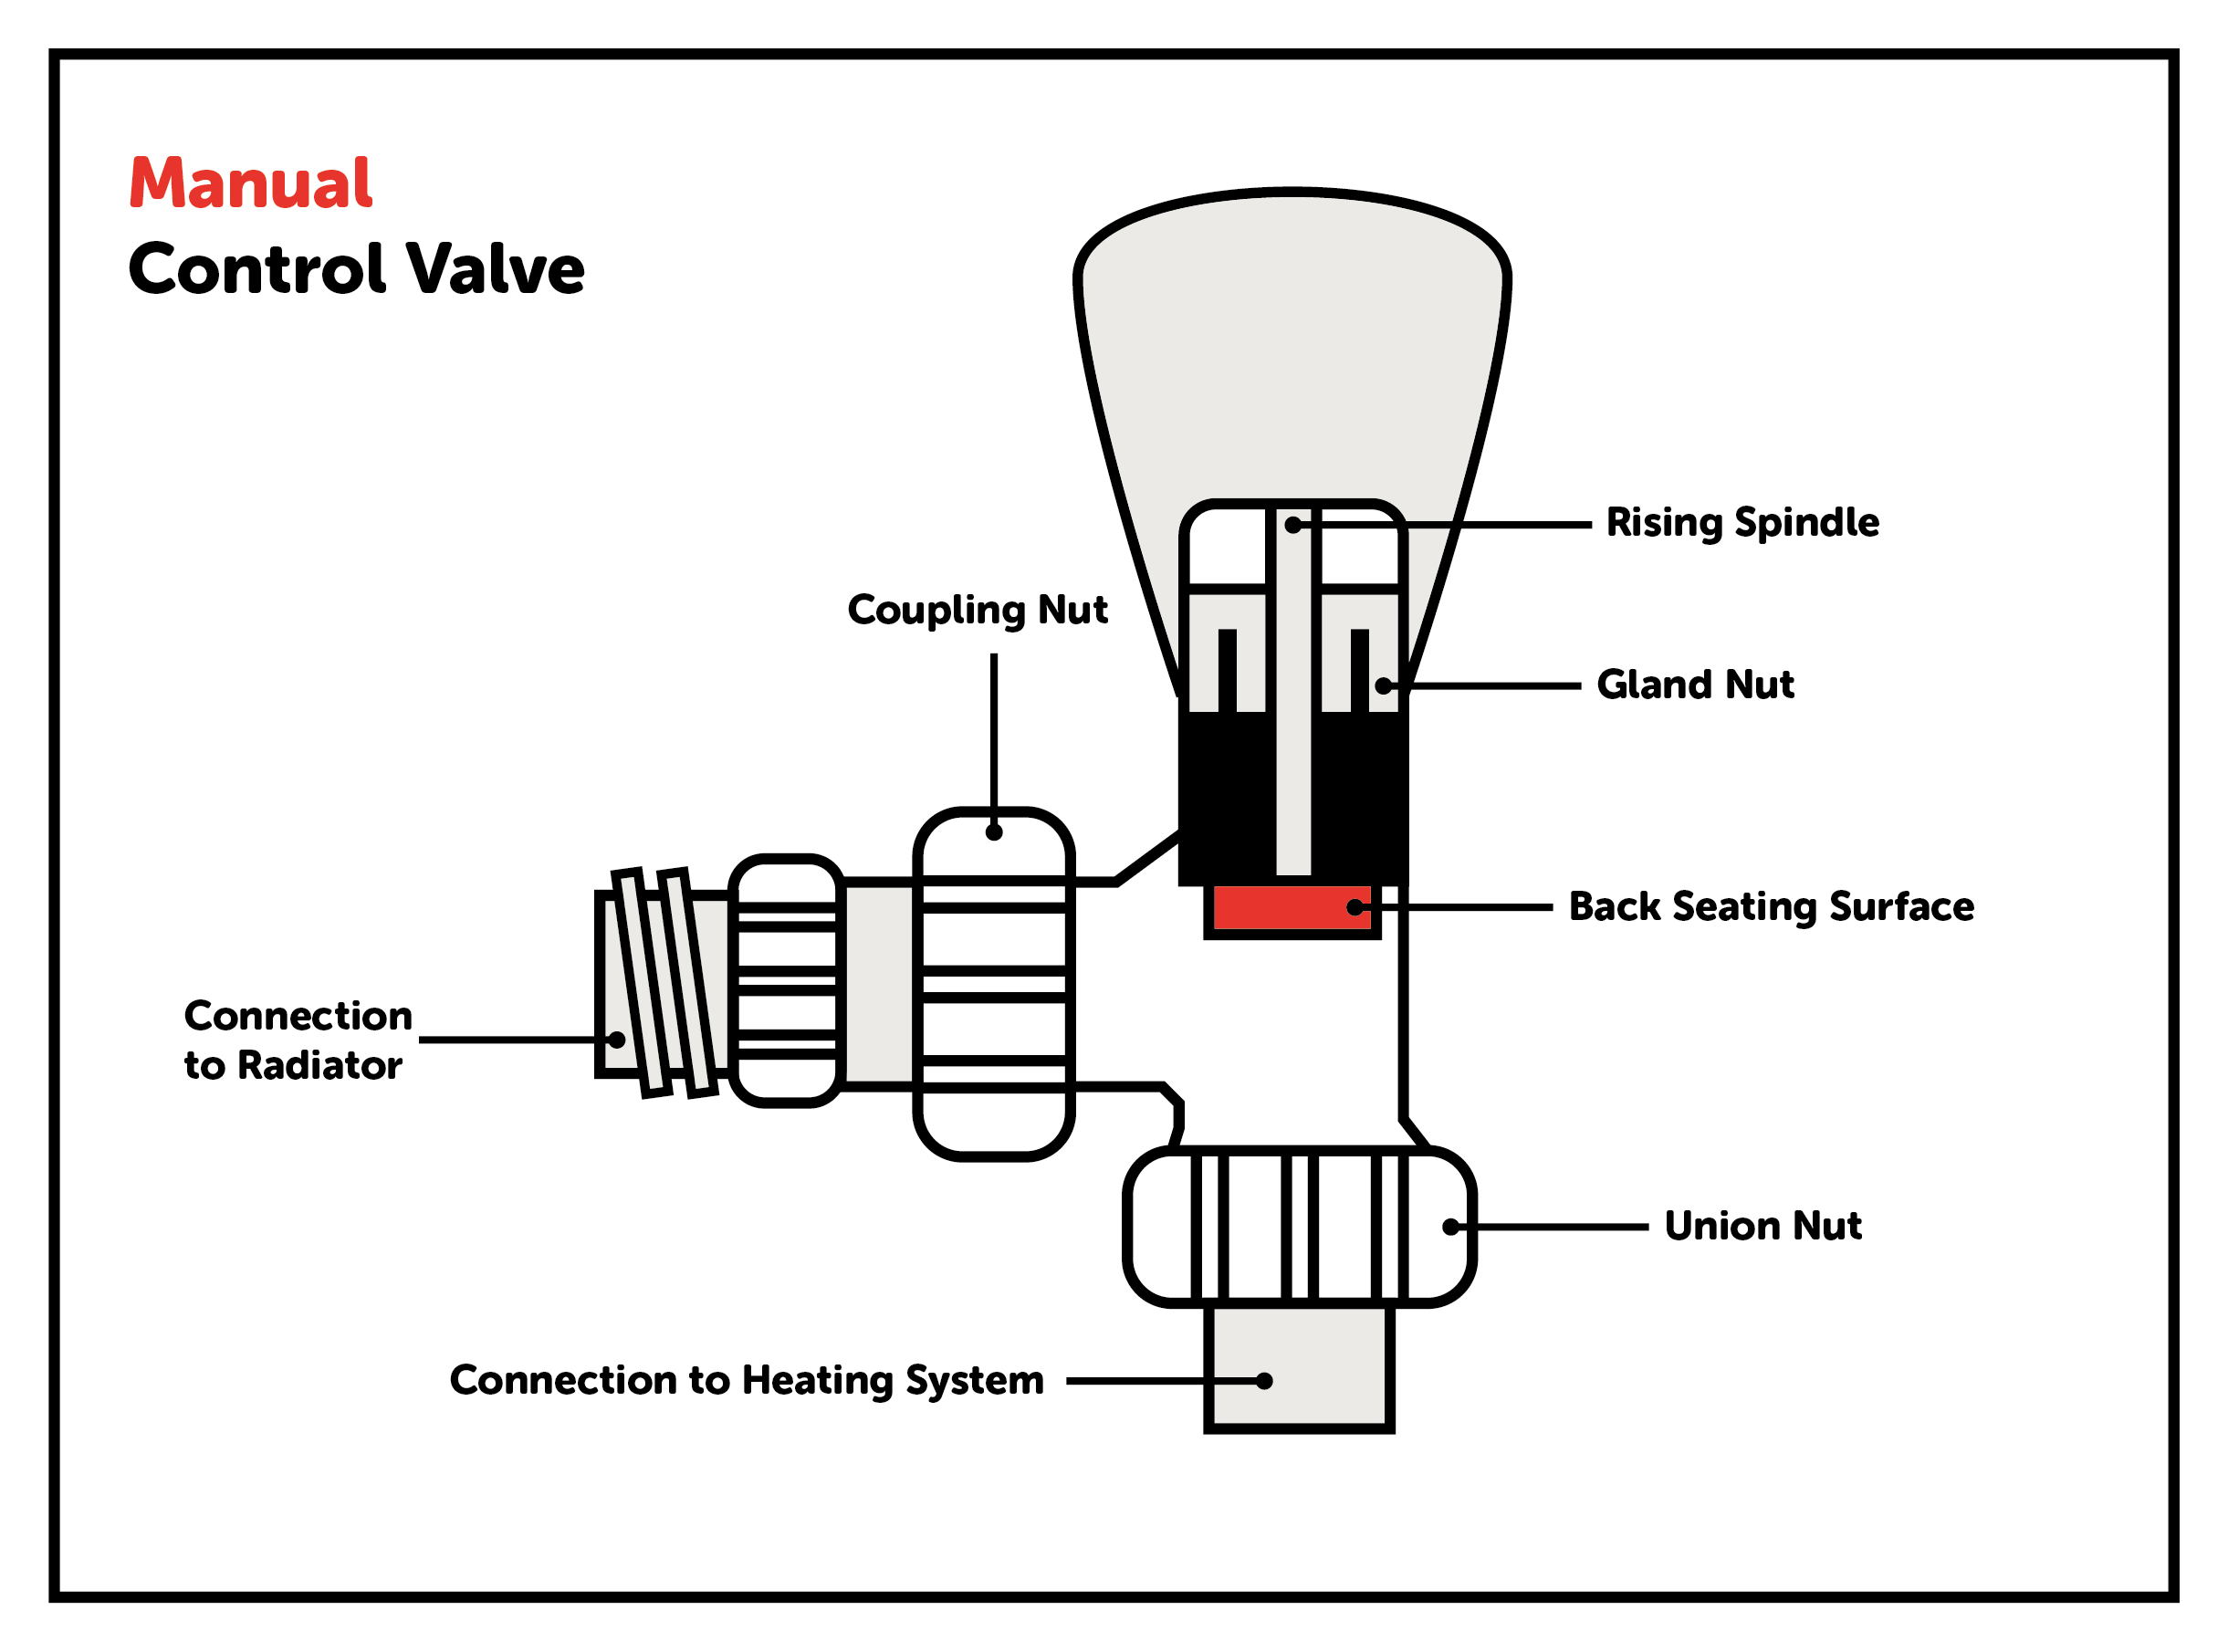 A graphic of a radiator's manual control valve with labelled parts, to help when fixing a radiator. The graphic indicates where the rising spindle, gland nut, coupling nut, back seating surface, connection to radiator, union nut and connection to heating system are located.